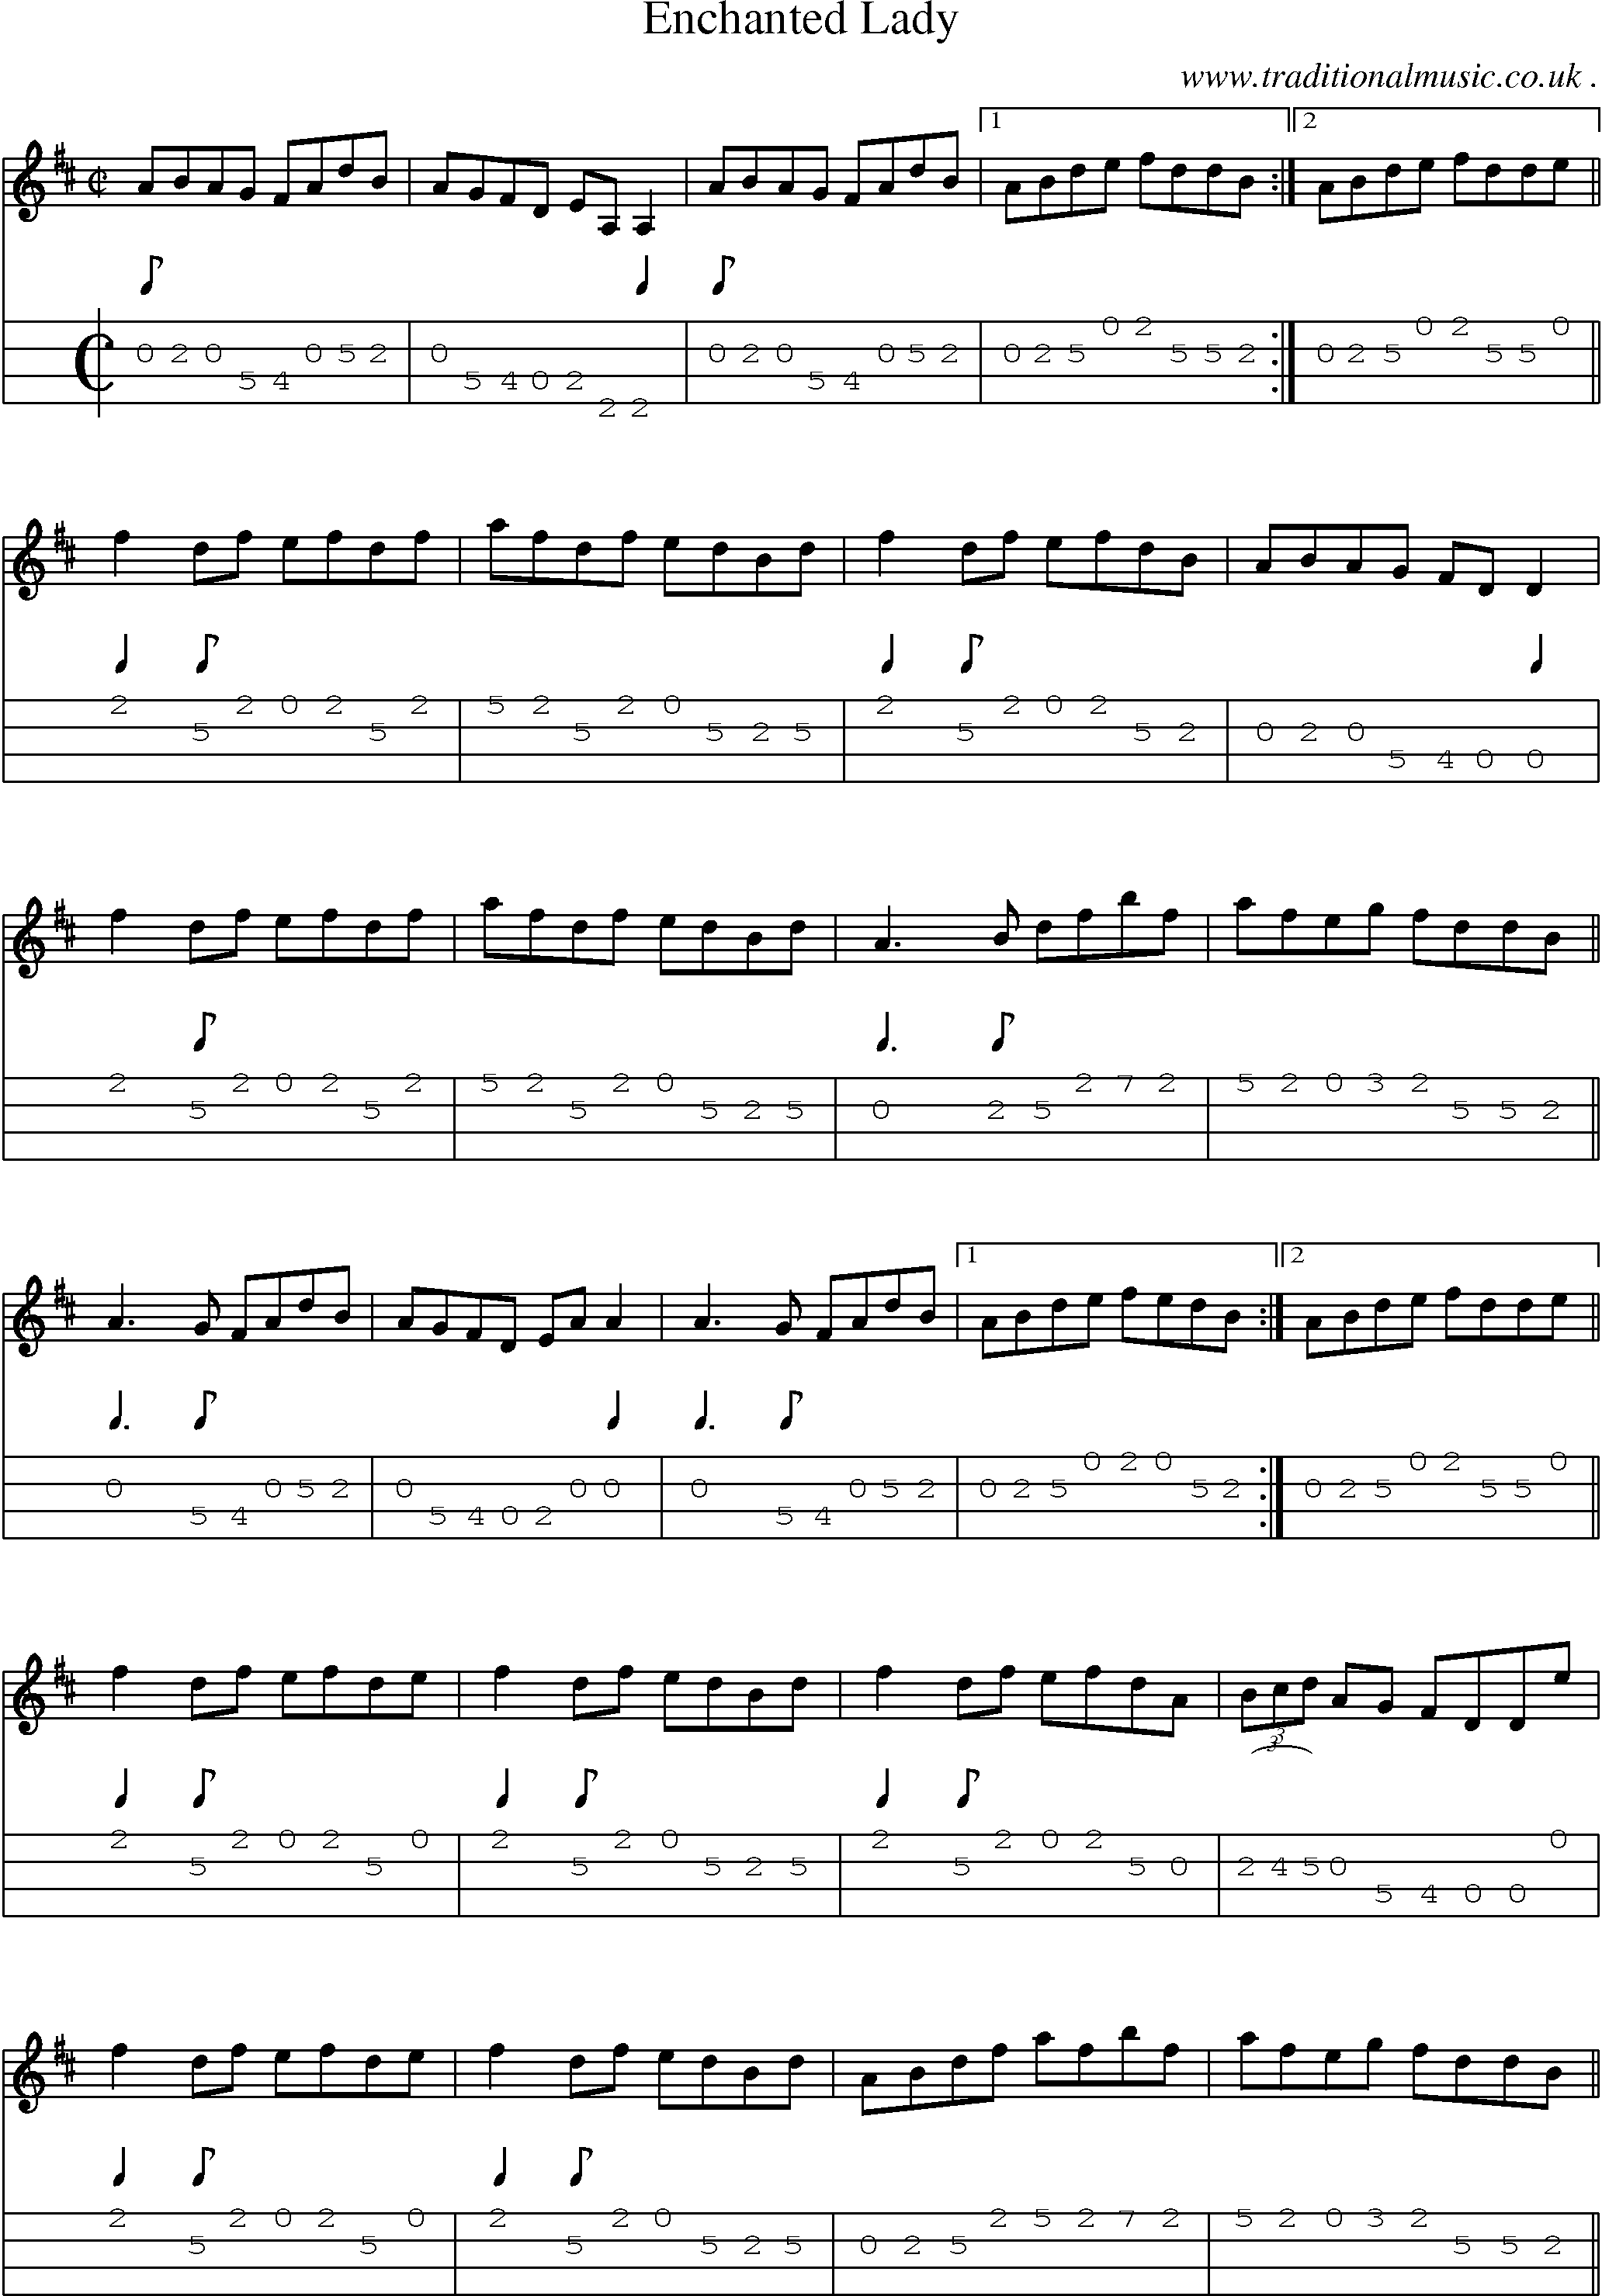 Sheet-Music and Mandolin Tabs for Enchanted Lady